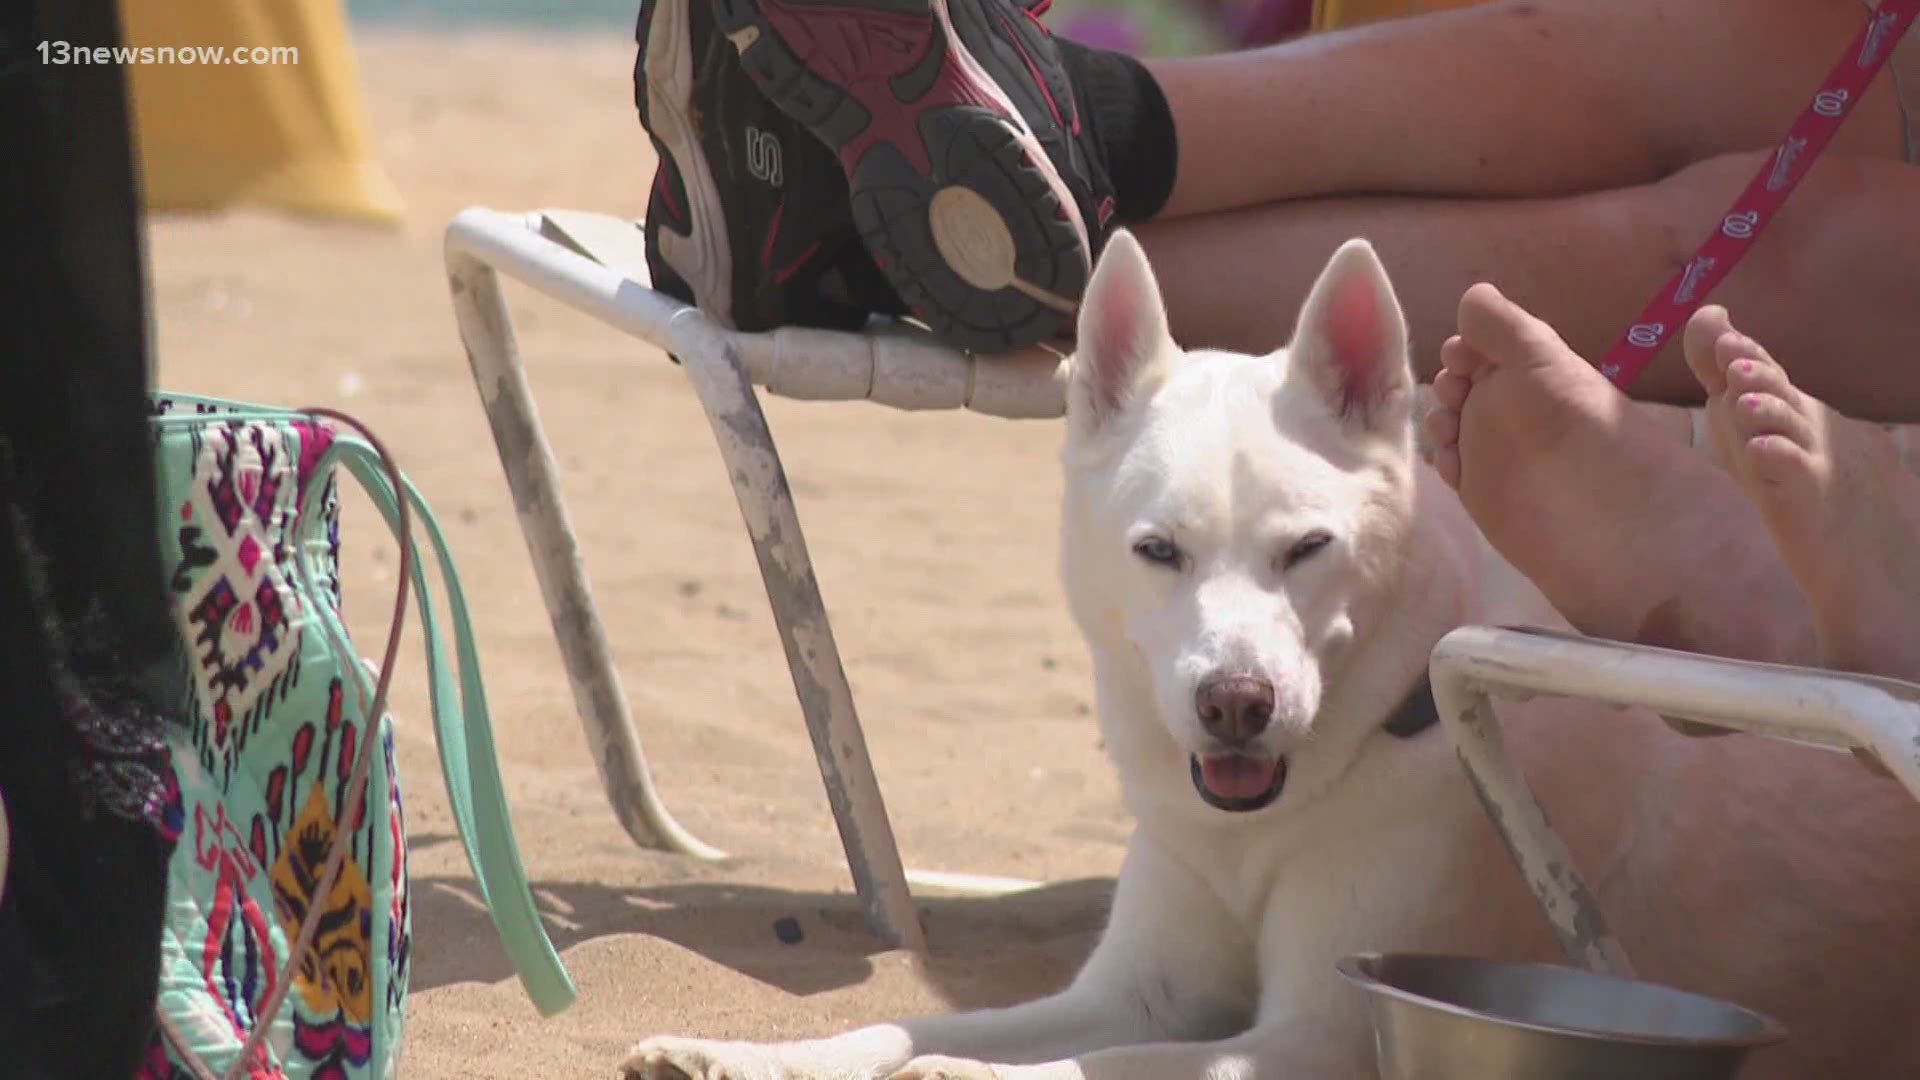 Virginia Beach Animal Control officers say they are patrolling the beaches for people not following the rules.